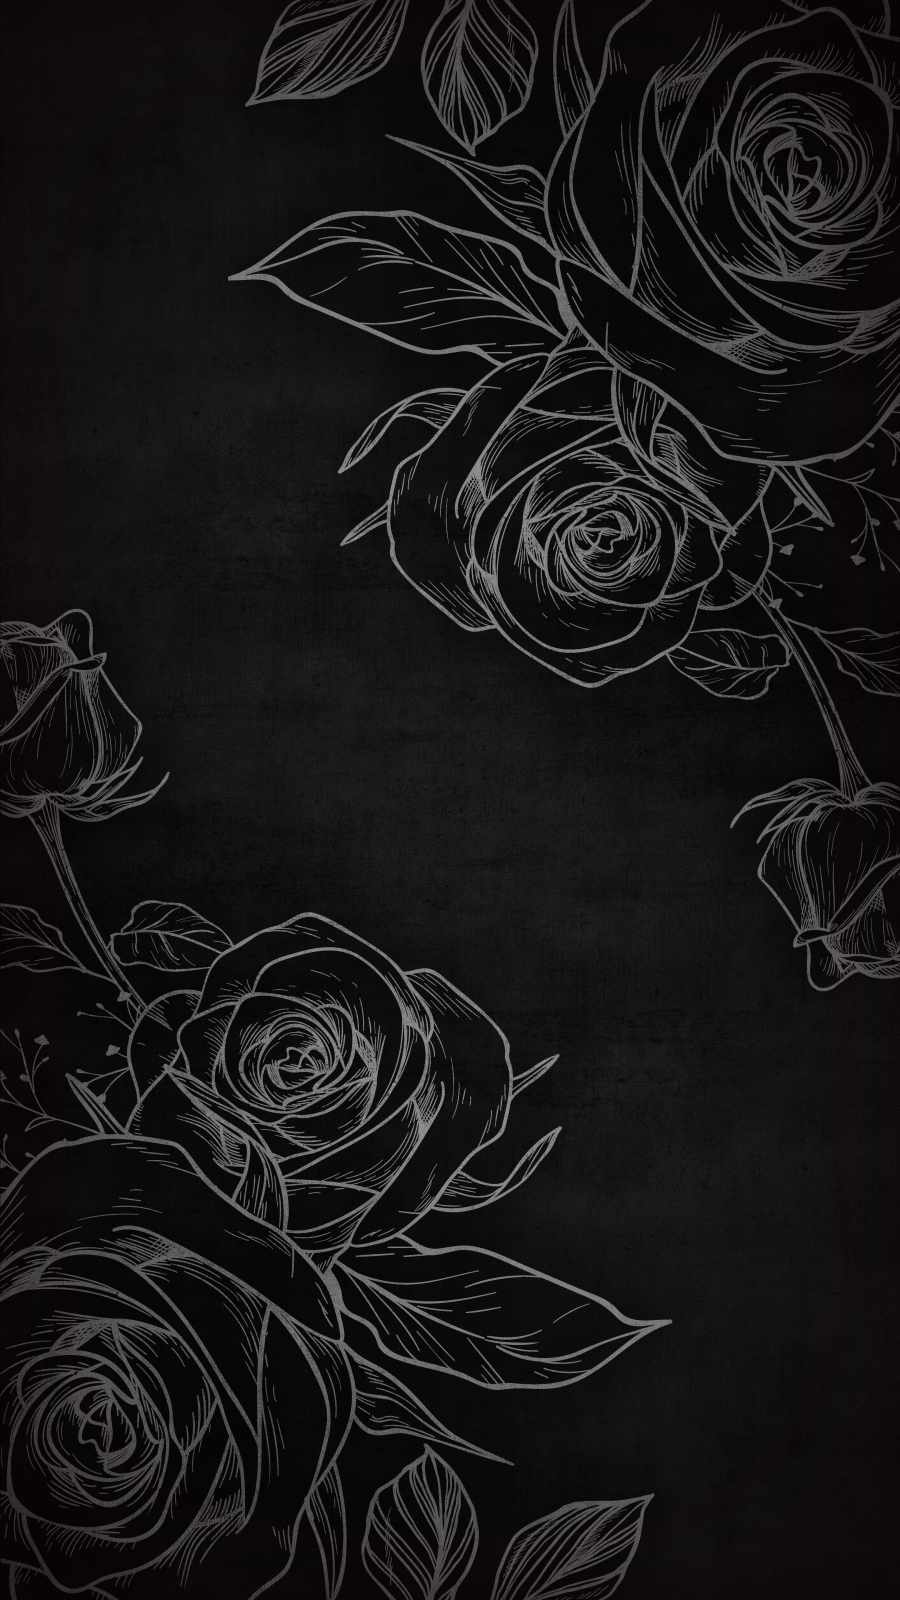 A Blackboard With Roses On It